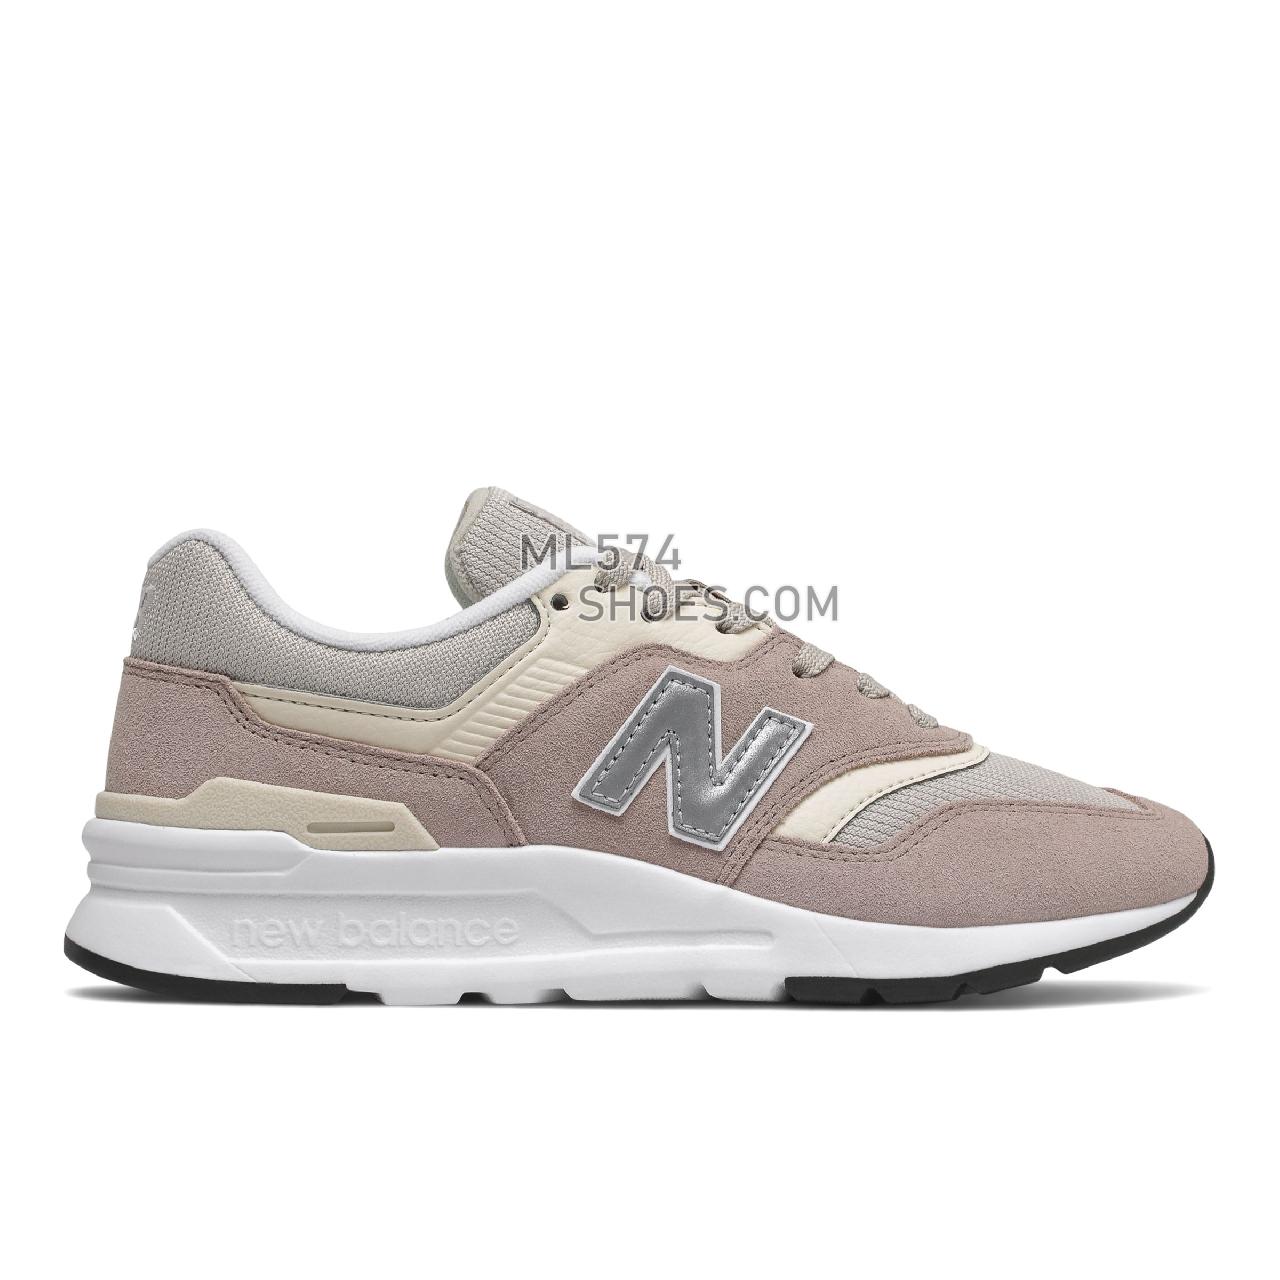 New Balance 997H - Women's Classic Sneakers - Au Lait with White - CW997HTM